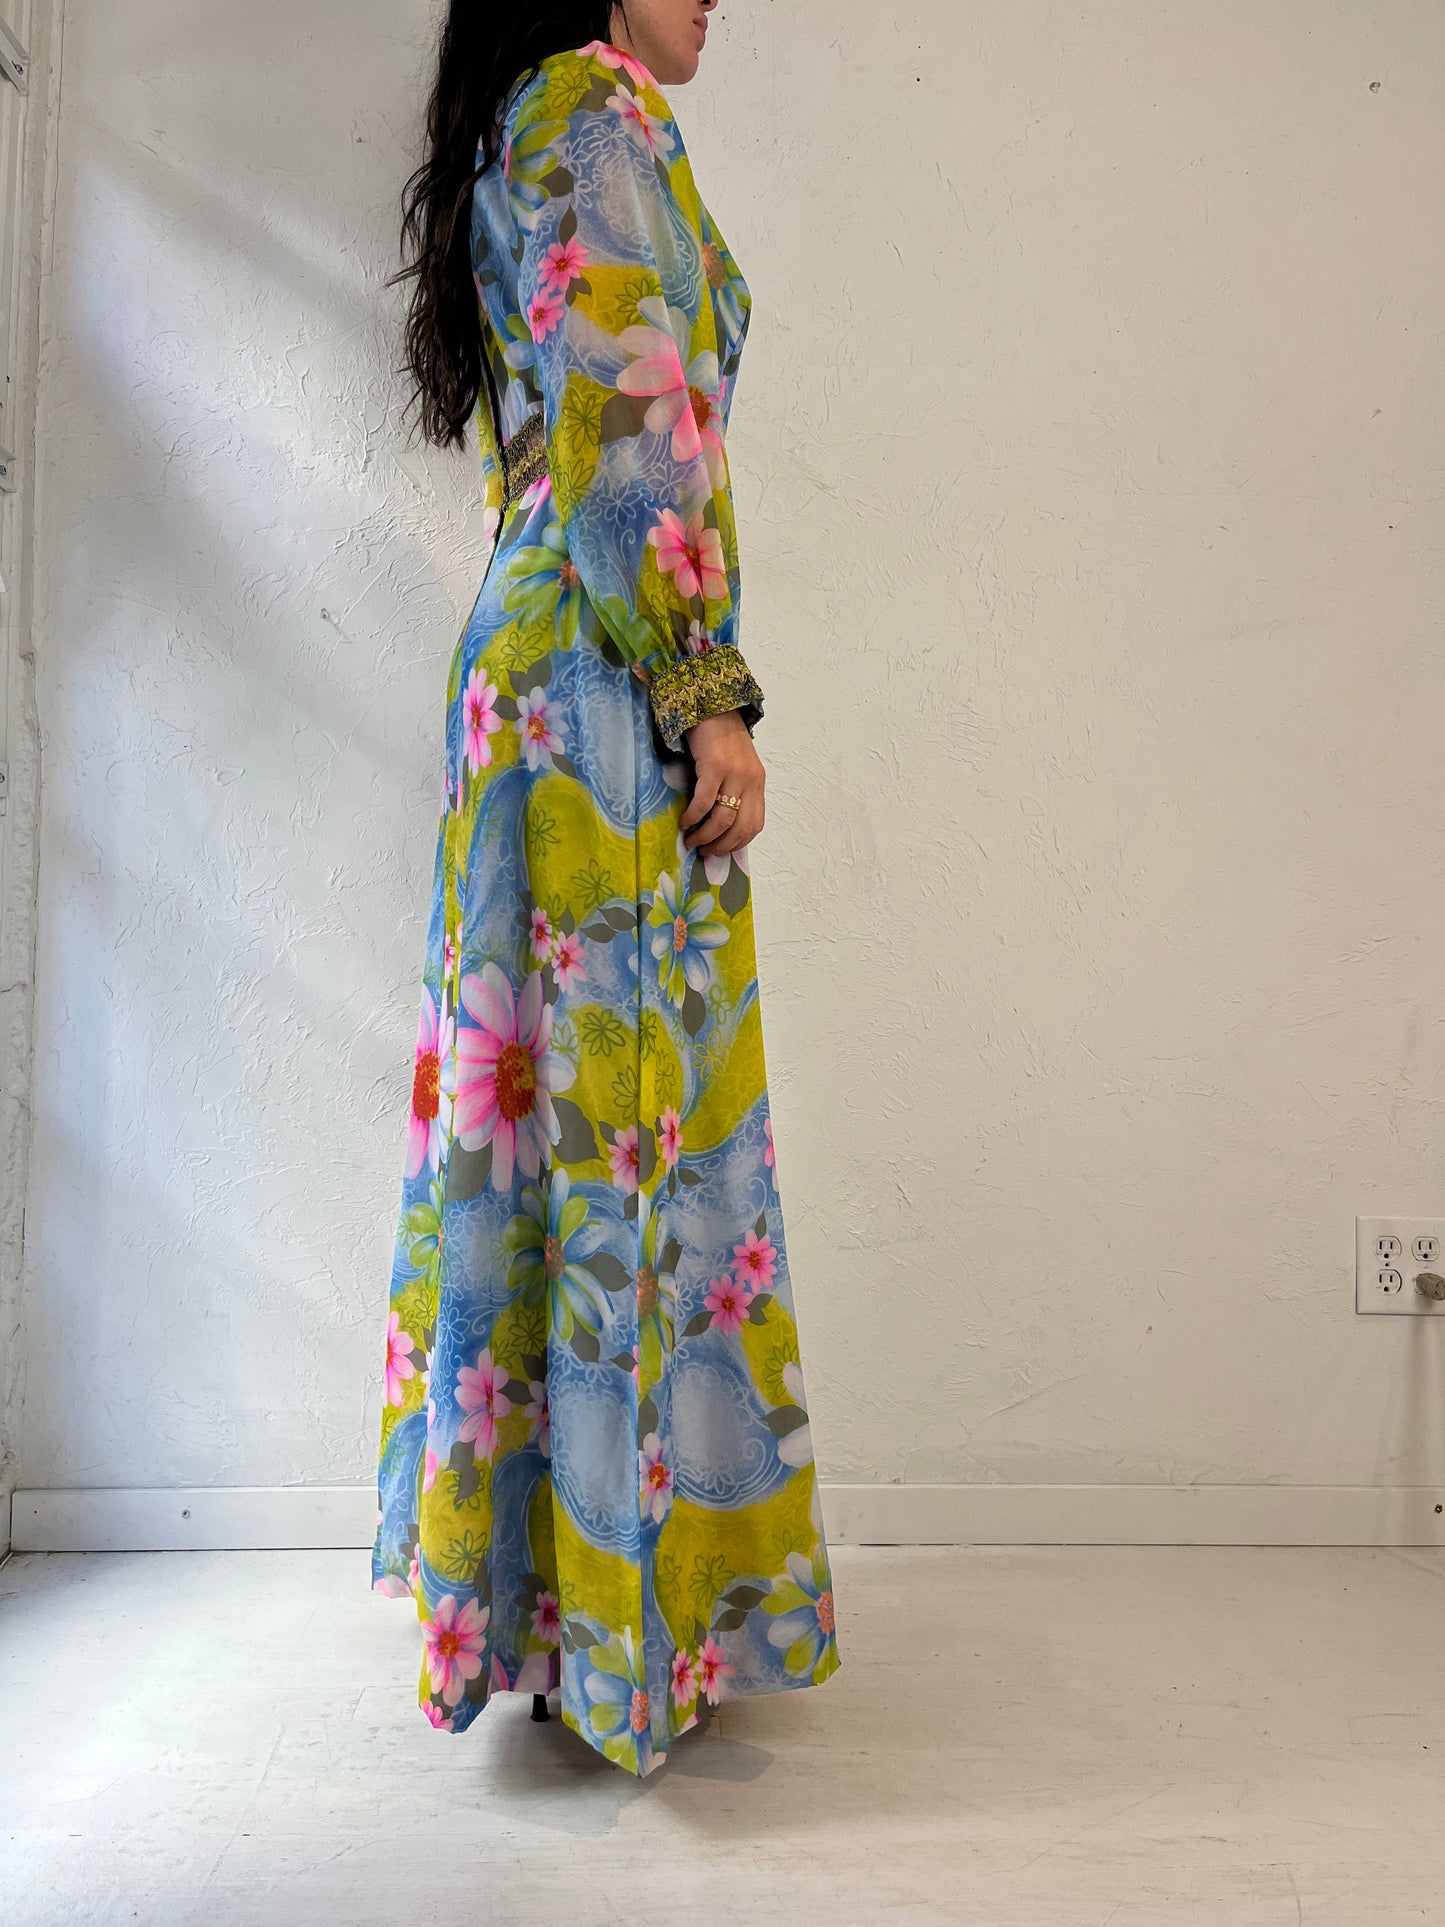 70s Floral Print Long Sleeve Hippie Dress / Small